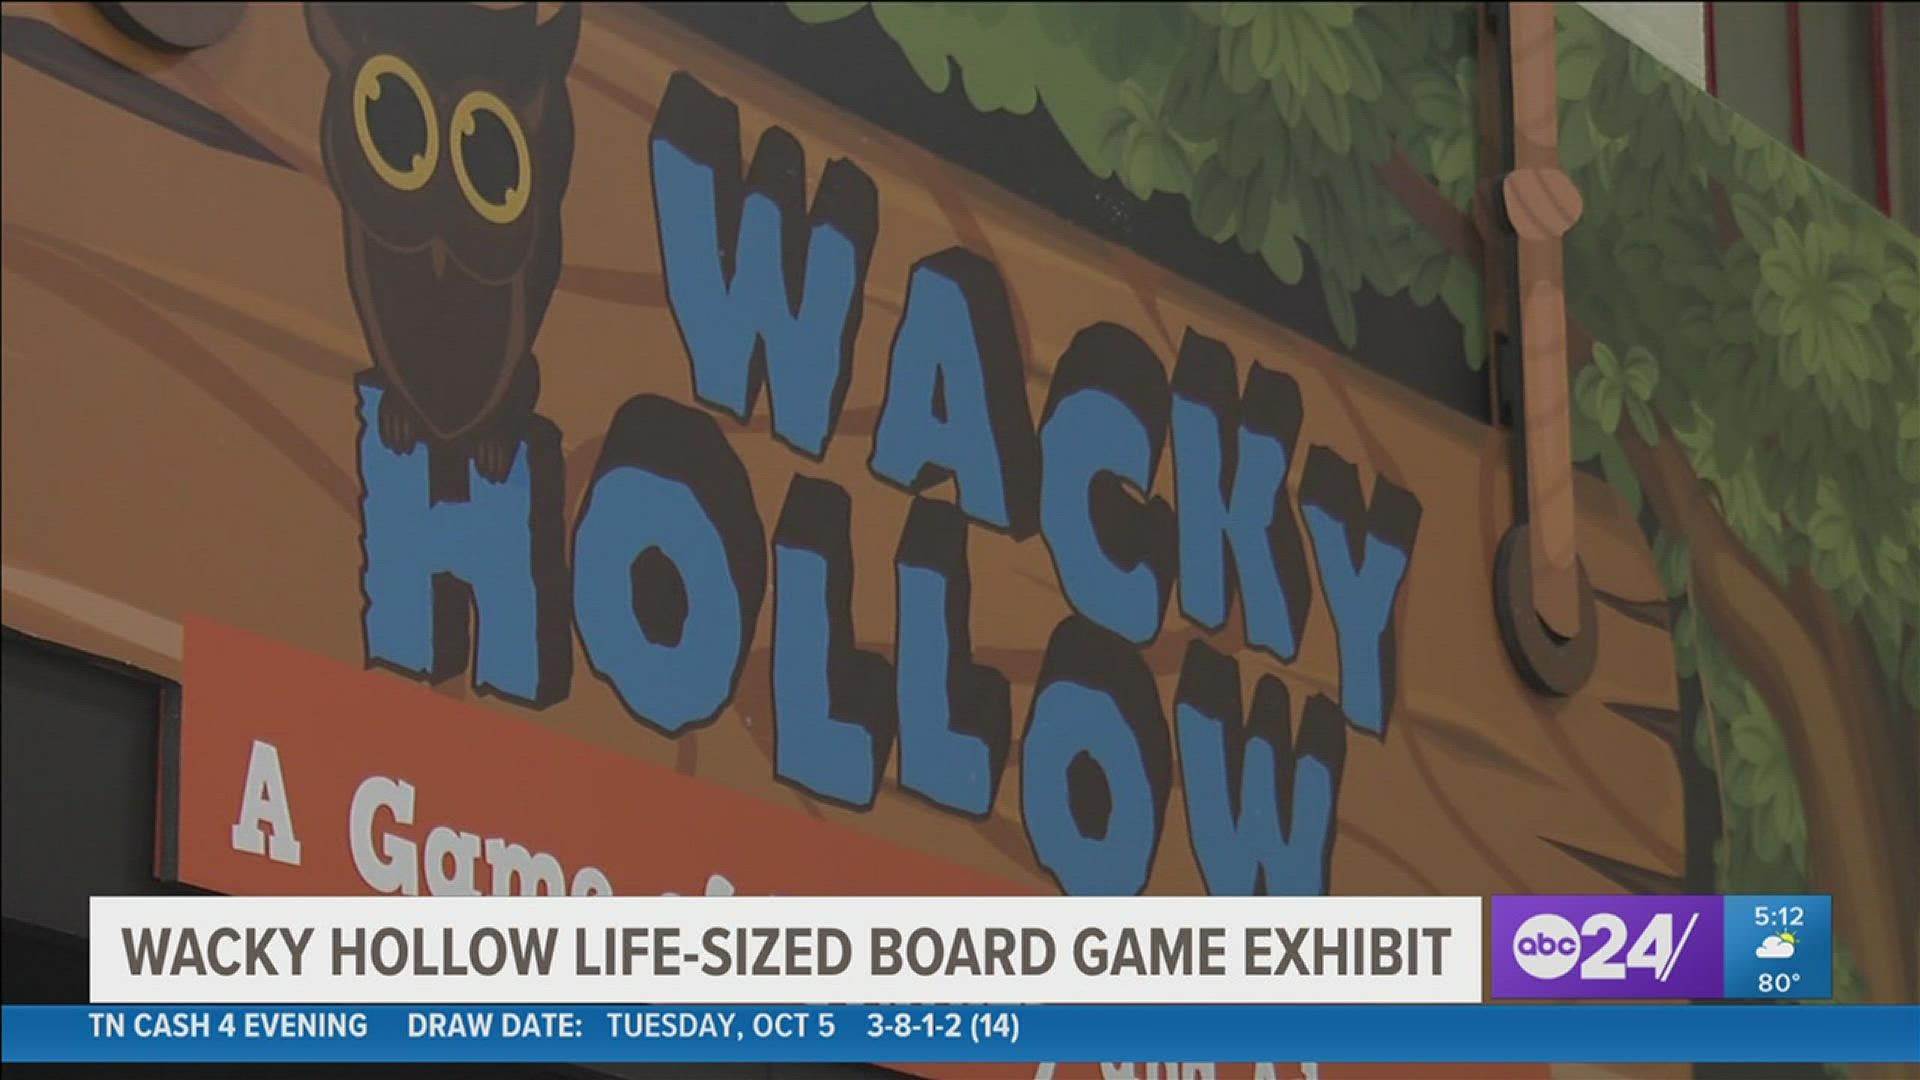 Wacky Hollow is free with admission and runs until November 28, 2021.